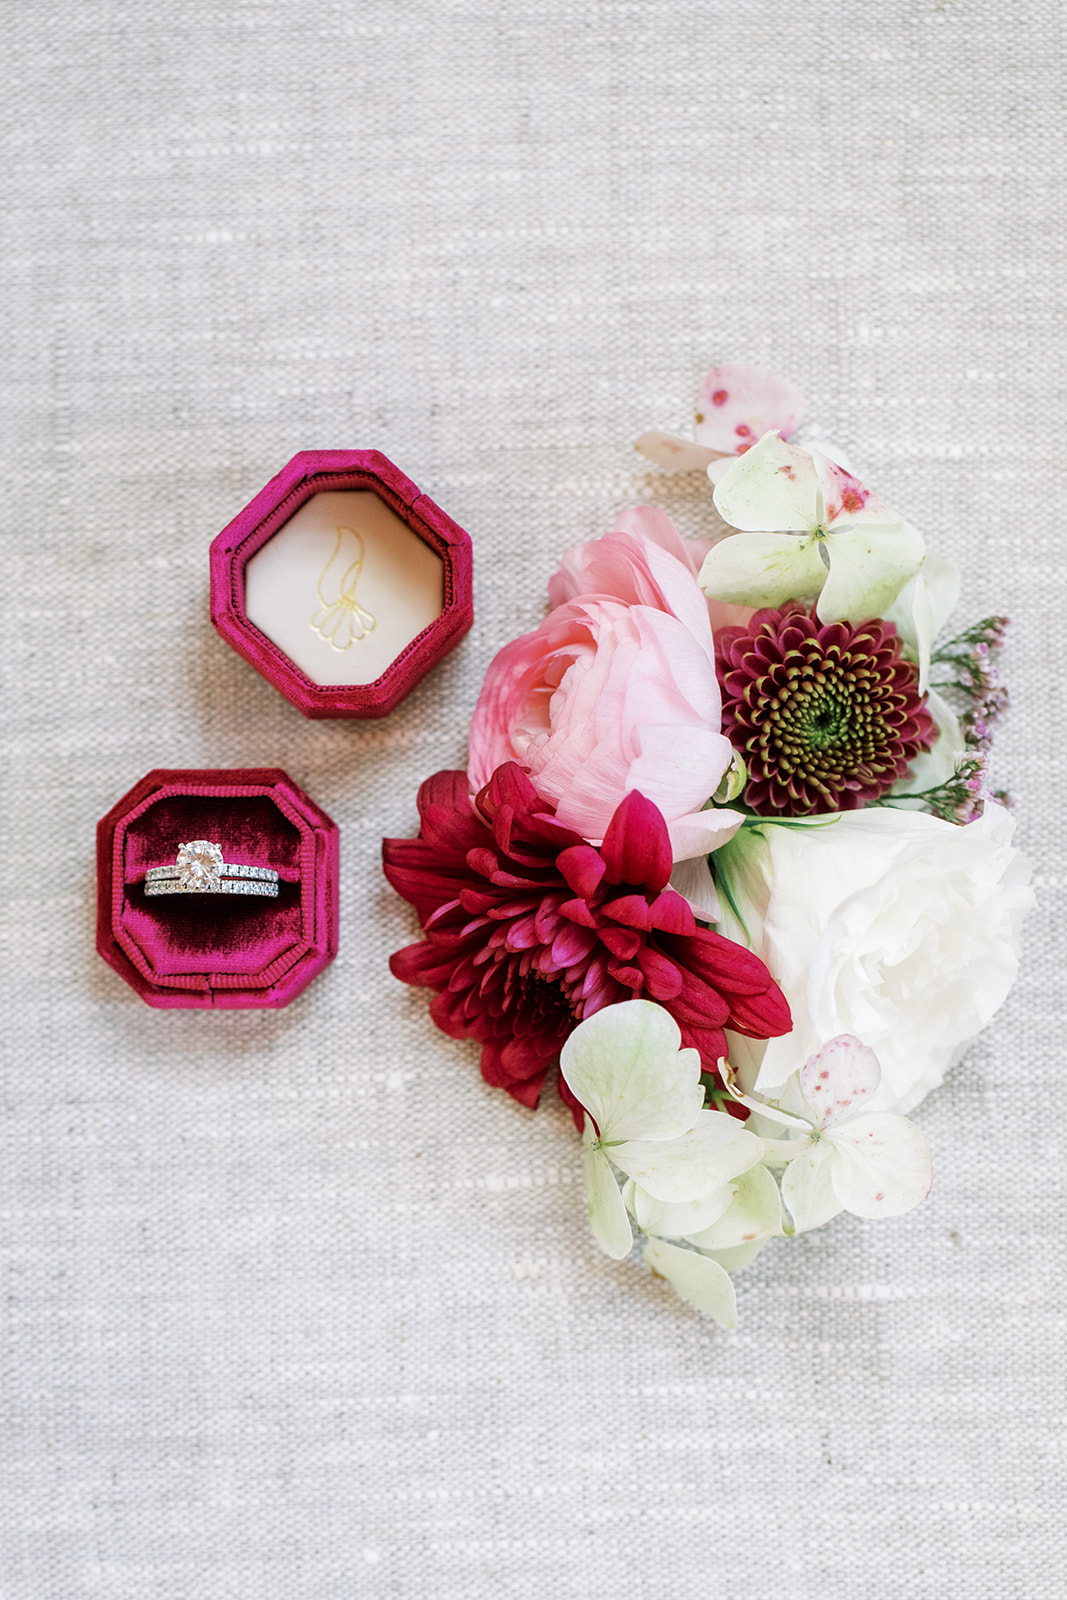 Colourful, vintage inspired velvet burgundy red wedding ring box, and gorgeous florals by Rose & Vine. Burgundy wedding inspiration, burgundy and berry wedding details